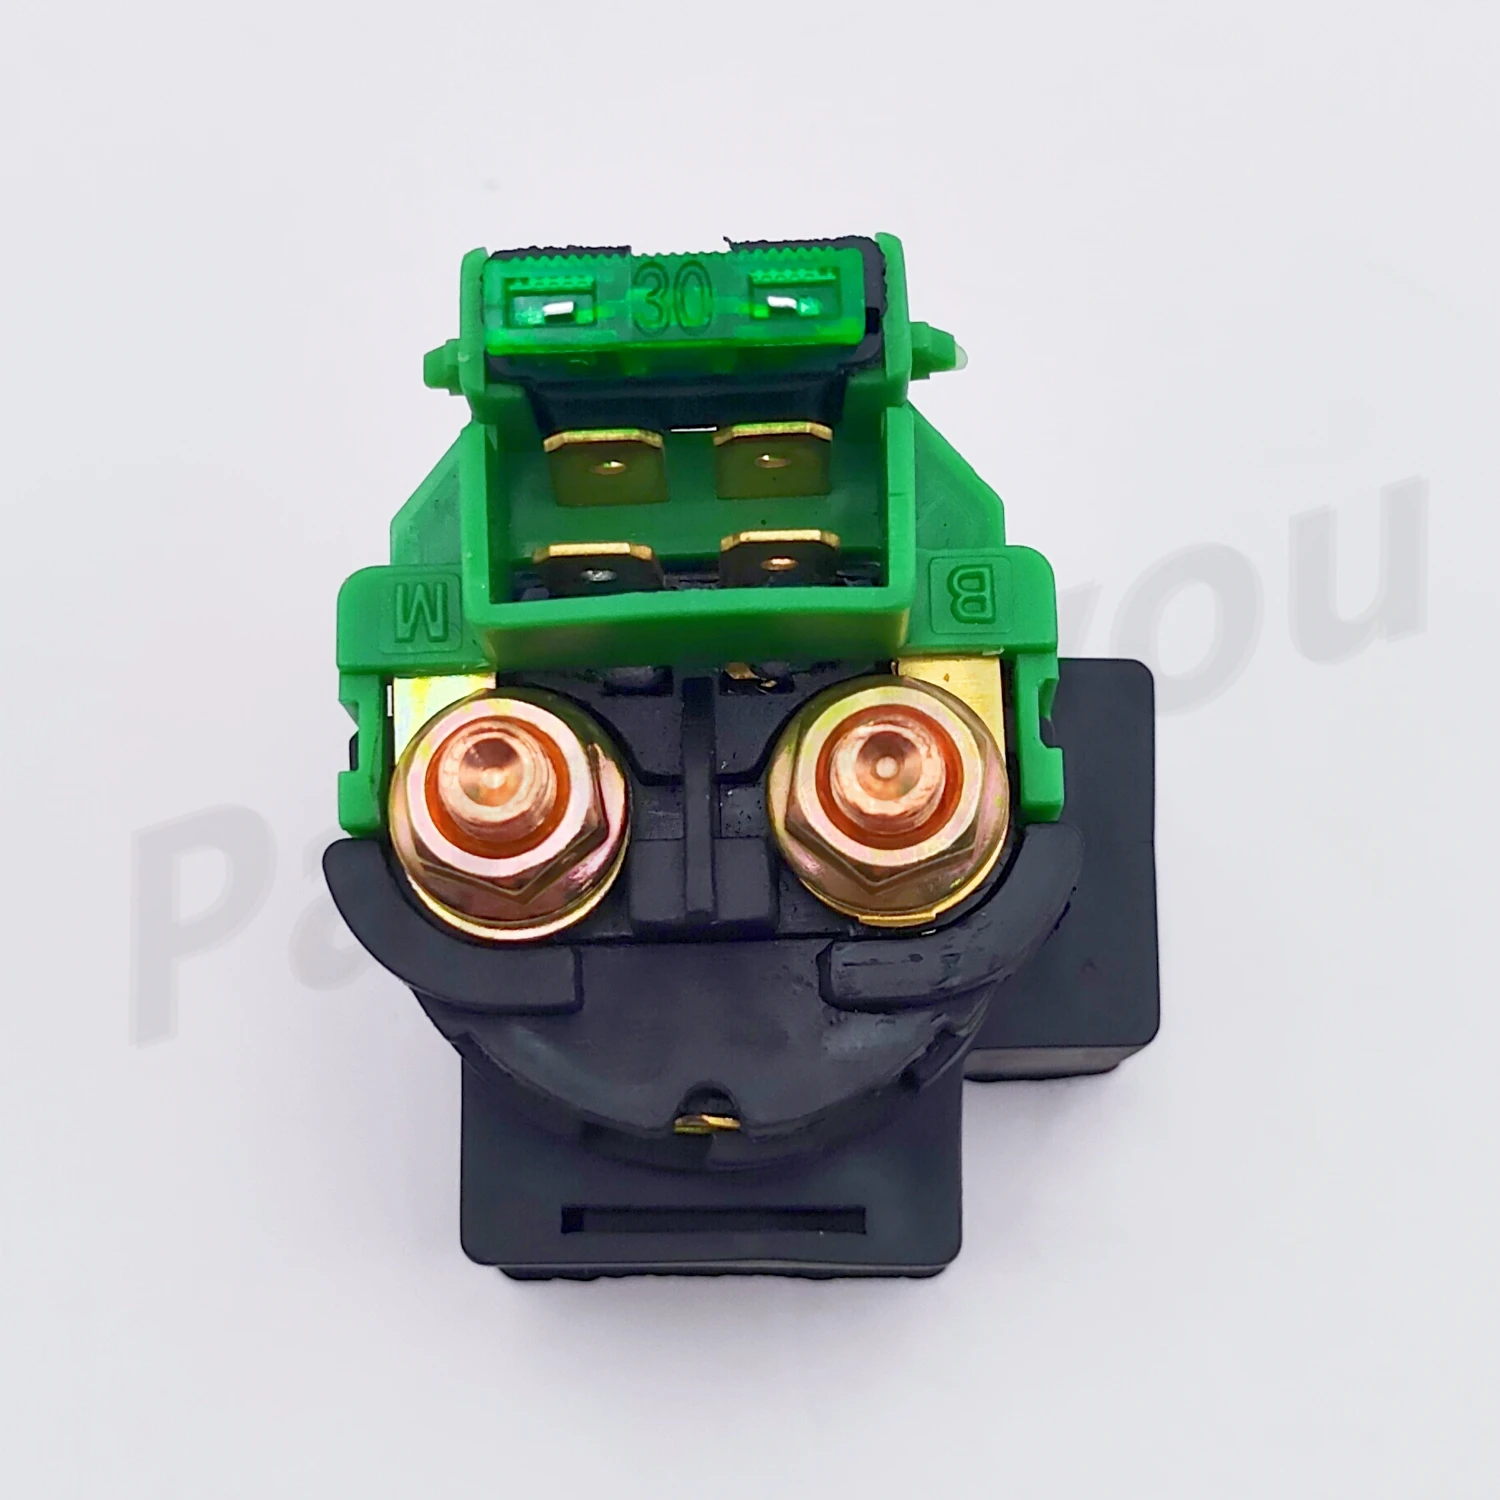 Solenoid Starter Relay for CFmoto 450 500 520 550 600 800 850 1000 X5 X6 X8 Z6 650TR 650MT 9010-150310 901-15.03.10 31800-5000 electric winch solenoid relay contactor 12v 250a for aut utv 5000 7000lbs winch contactor winches automotive parts